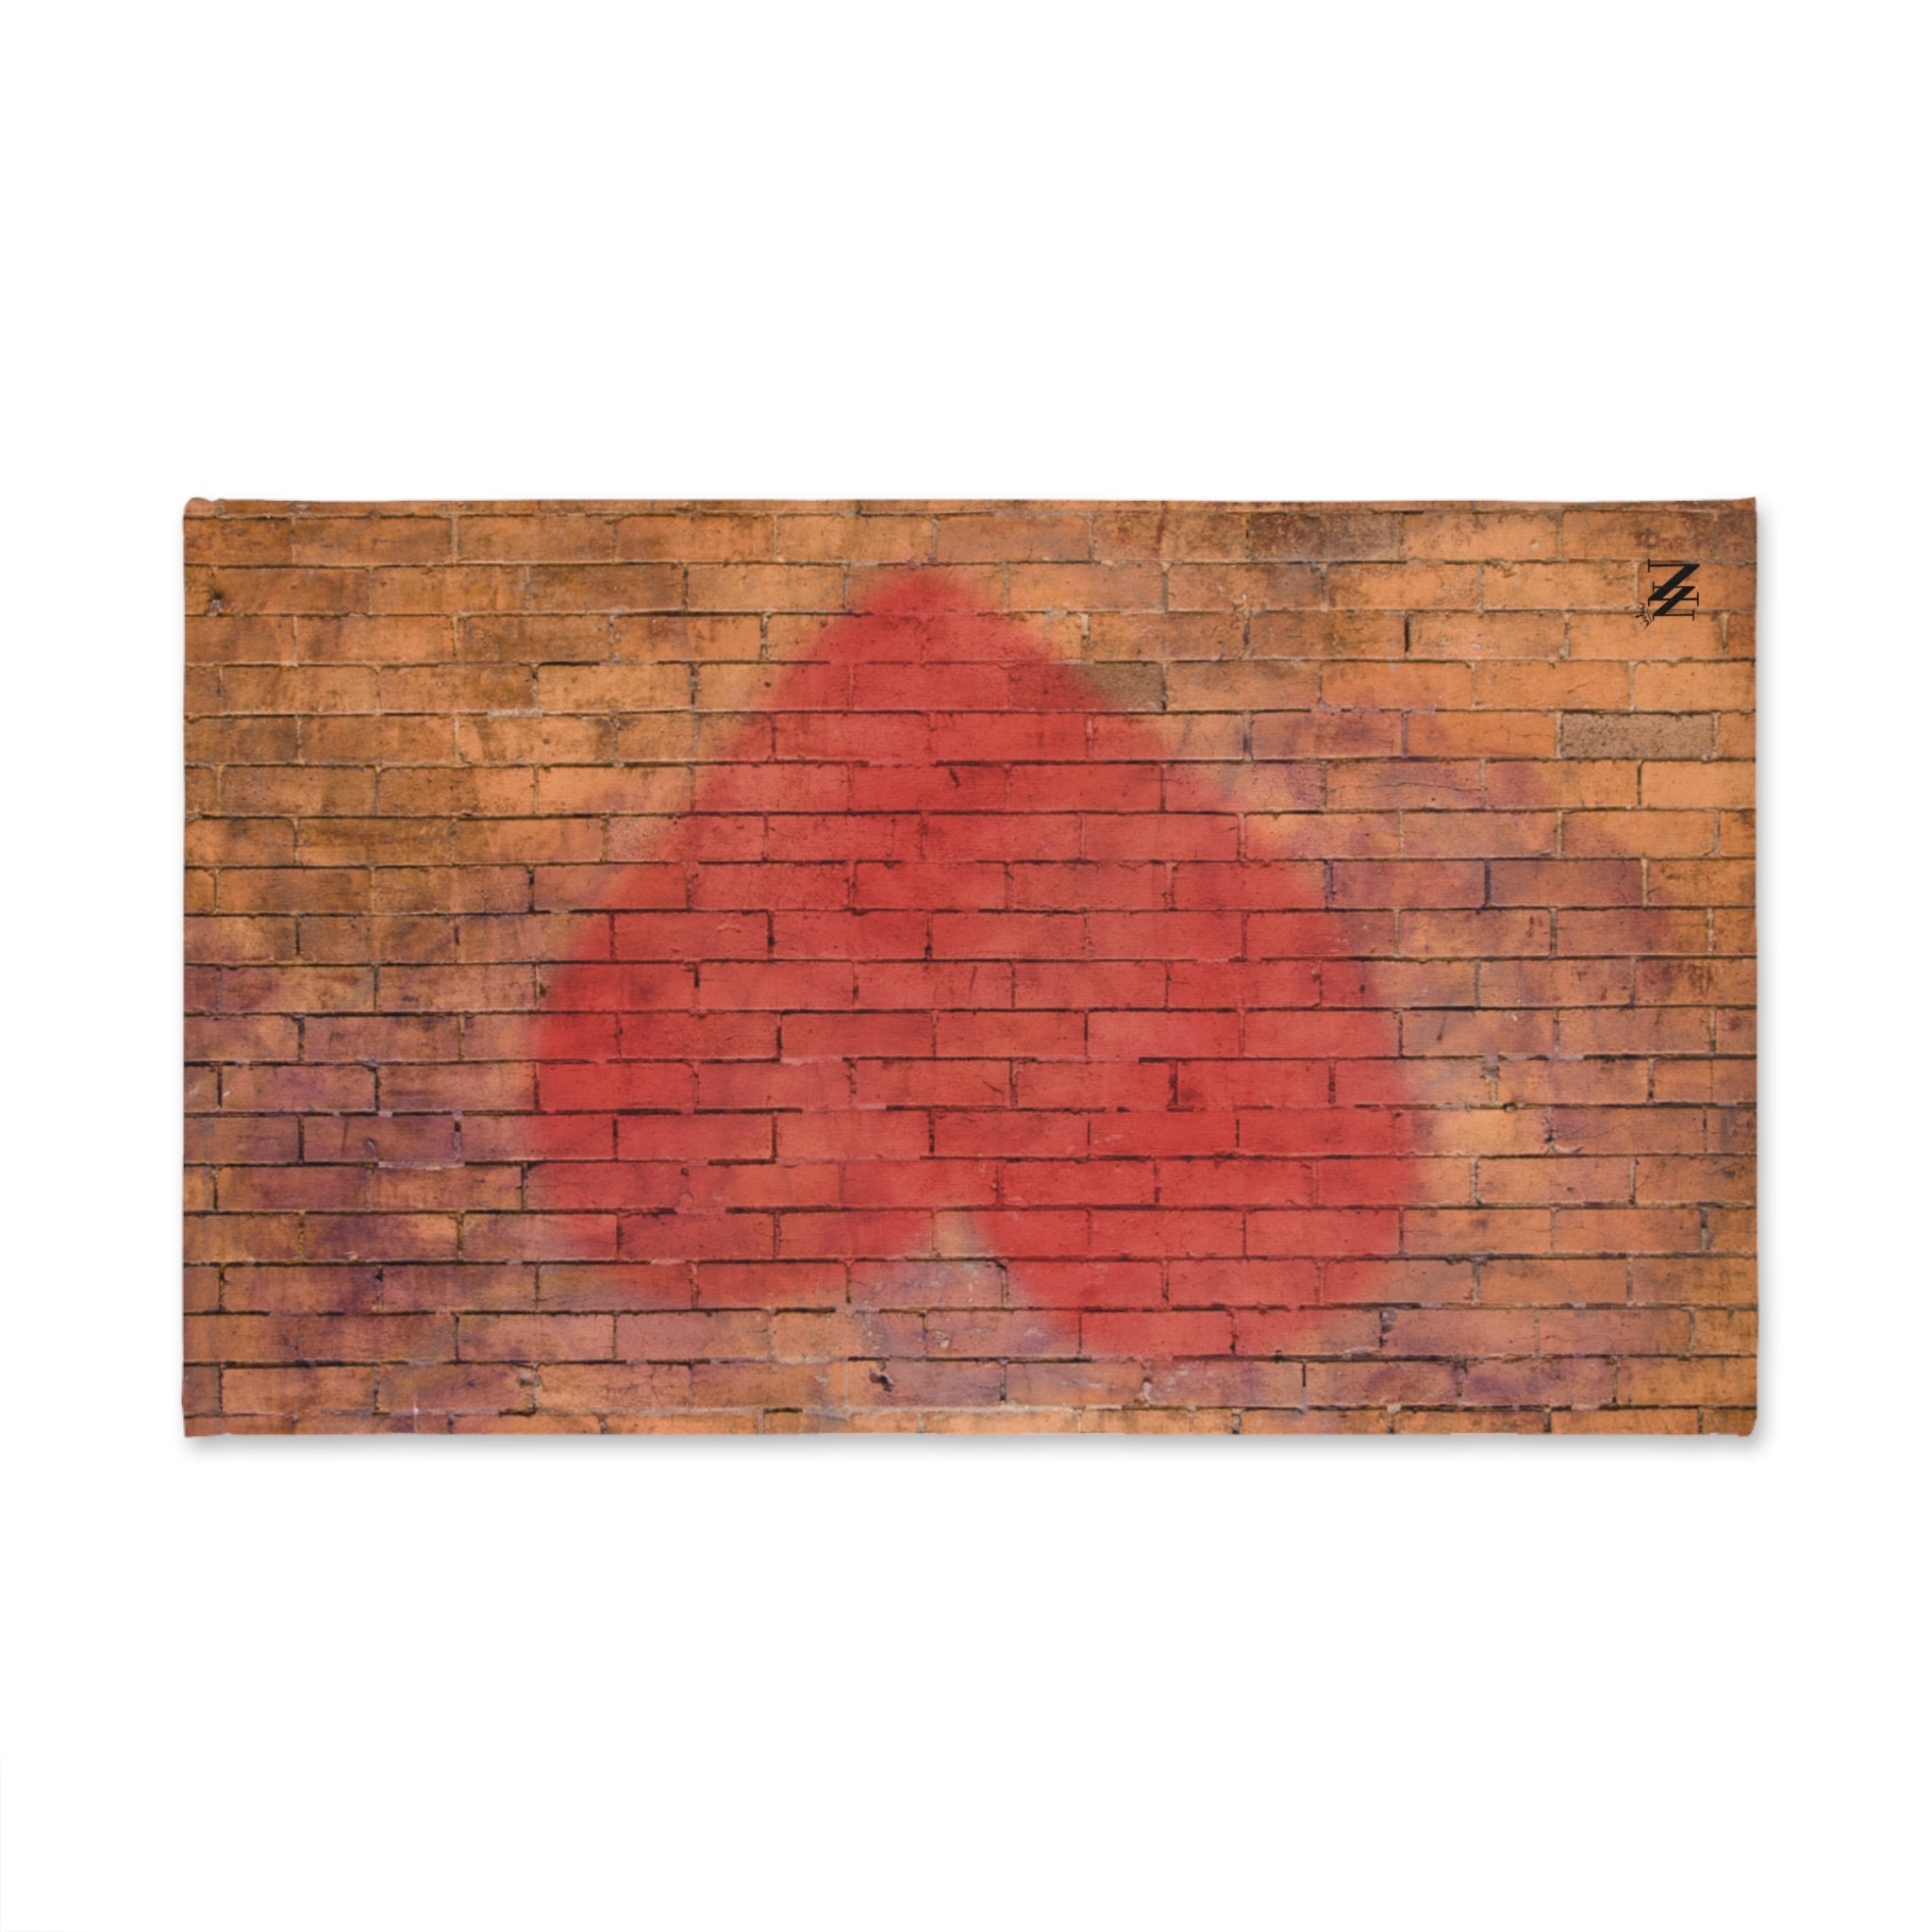 Heart Brick Wall White | Funny Gifts for Men - Gifts for Him - Birthday Gifts for Men, Him, Her, Husband, Boyfriend, Girlfriend, New Couple Gifts, Fathers & Valentines Day Gifts, Christmas Gifts NECTAR NAPKINS